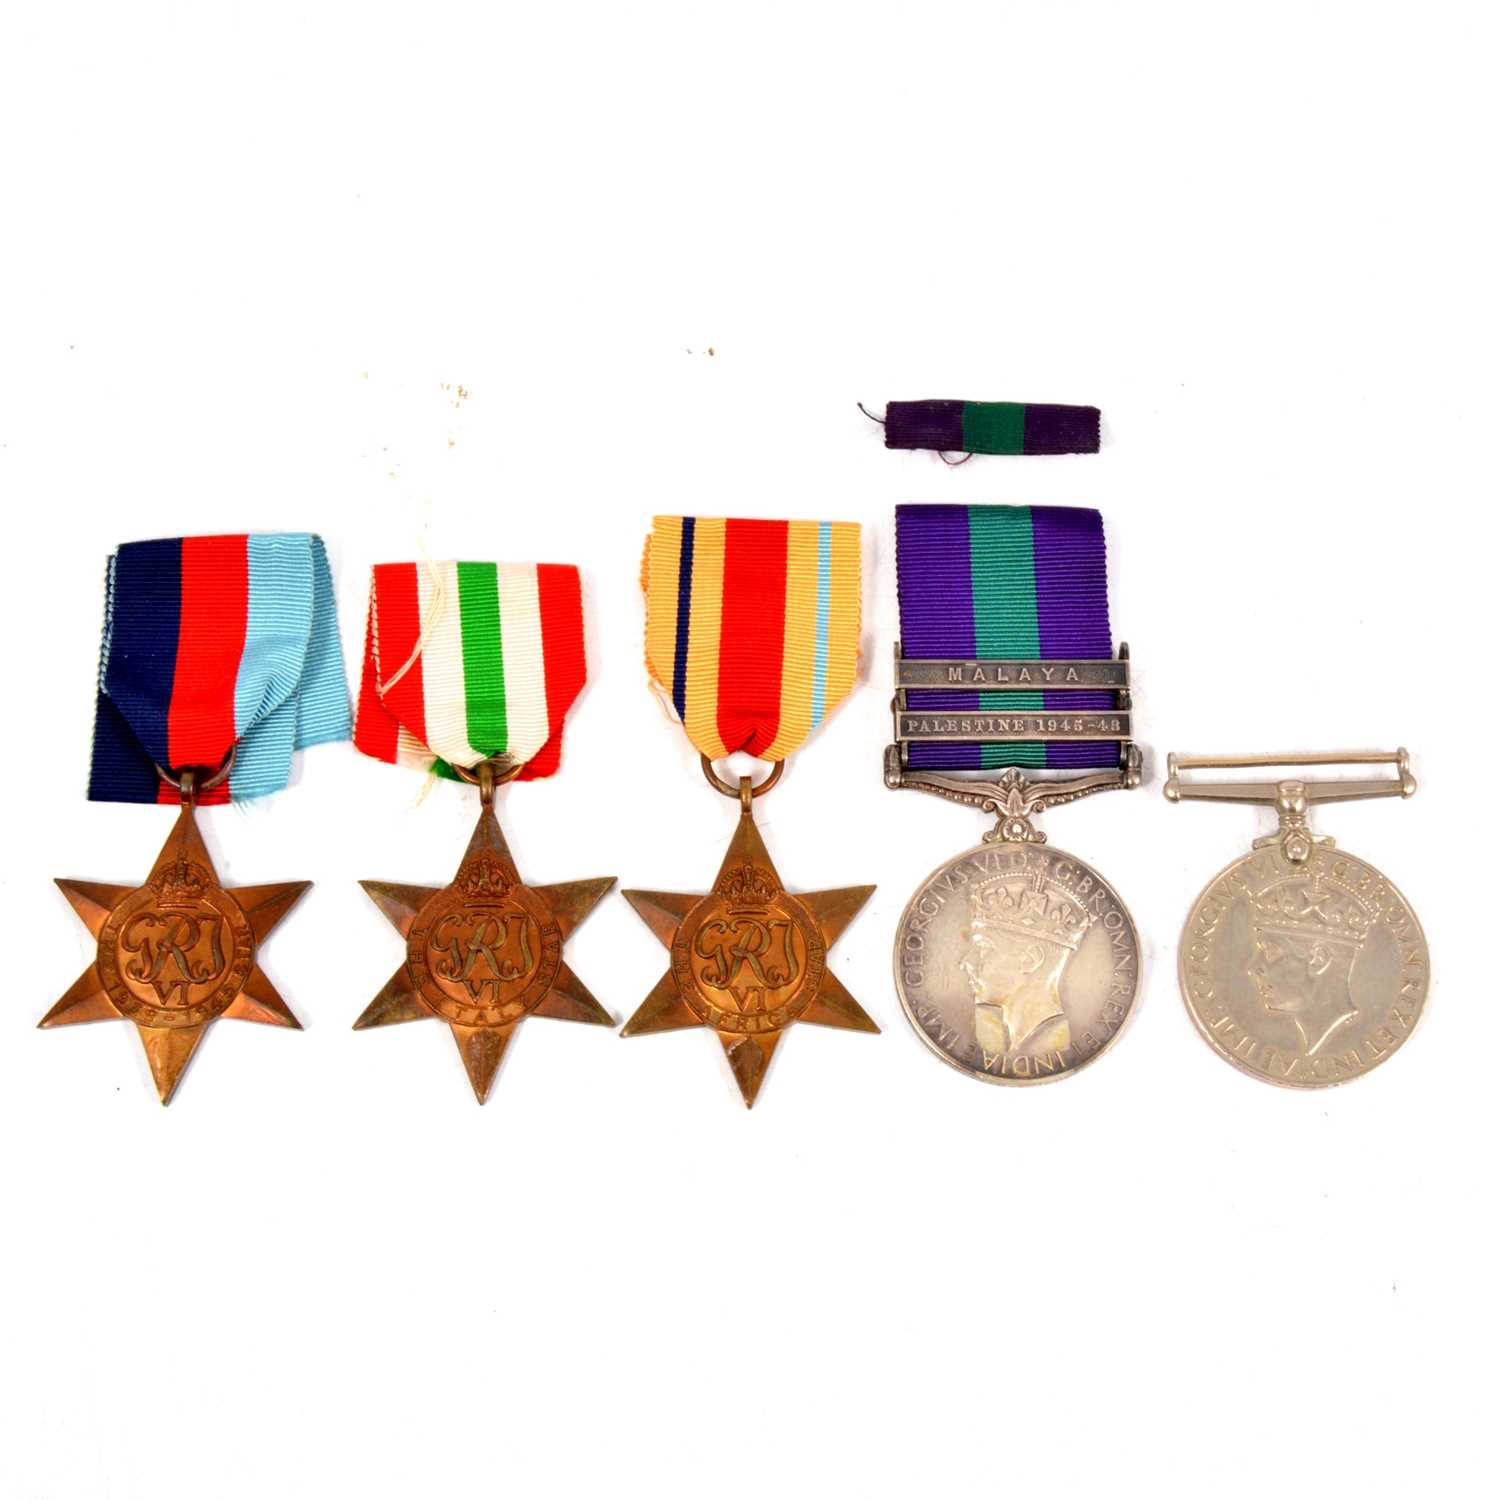 Lot 251 - Medals - Four WW2 medals, and a General Service Medal with bars.